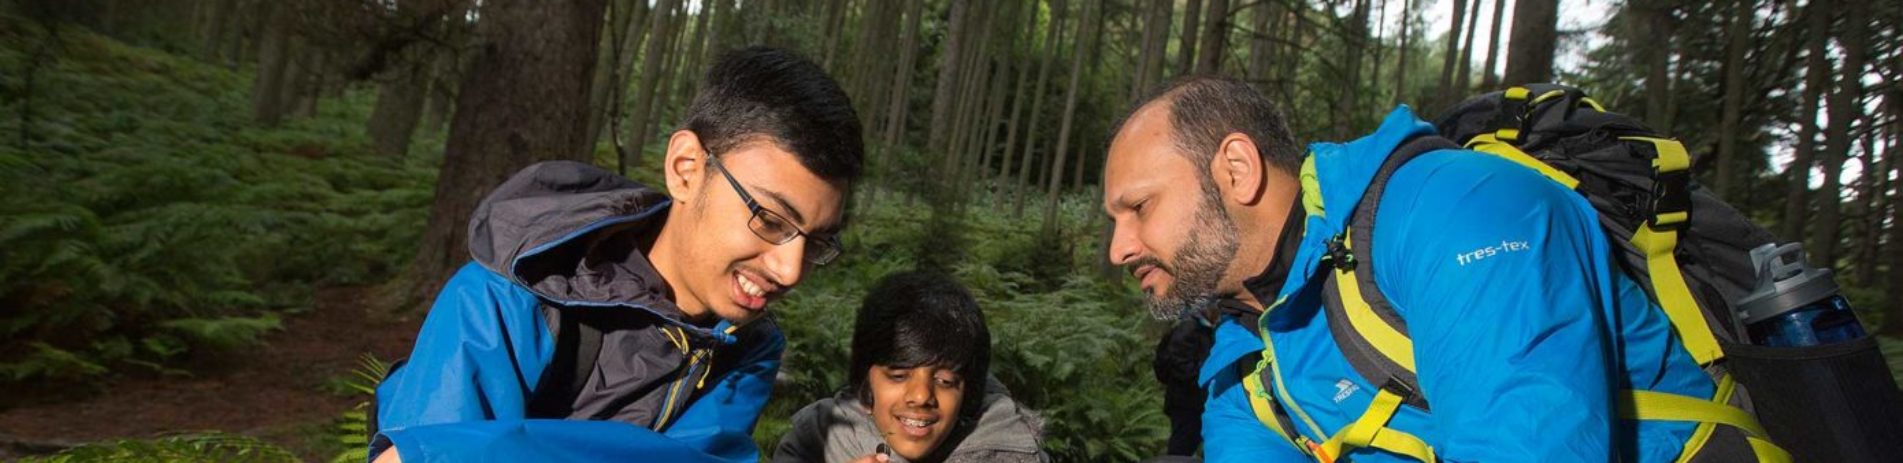 middle-aged-bearded-man-in-blue-outdoor-jacket-and-rucksack-crouched-on-ground-with-two-male-pupils-showing-them-a-plant-in-his-fingers-close-to-the-ground-they-are-in-the-forest